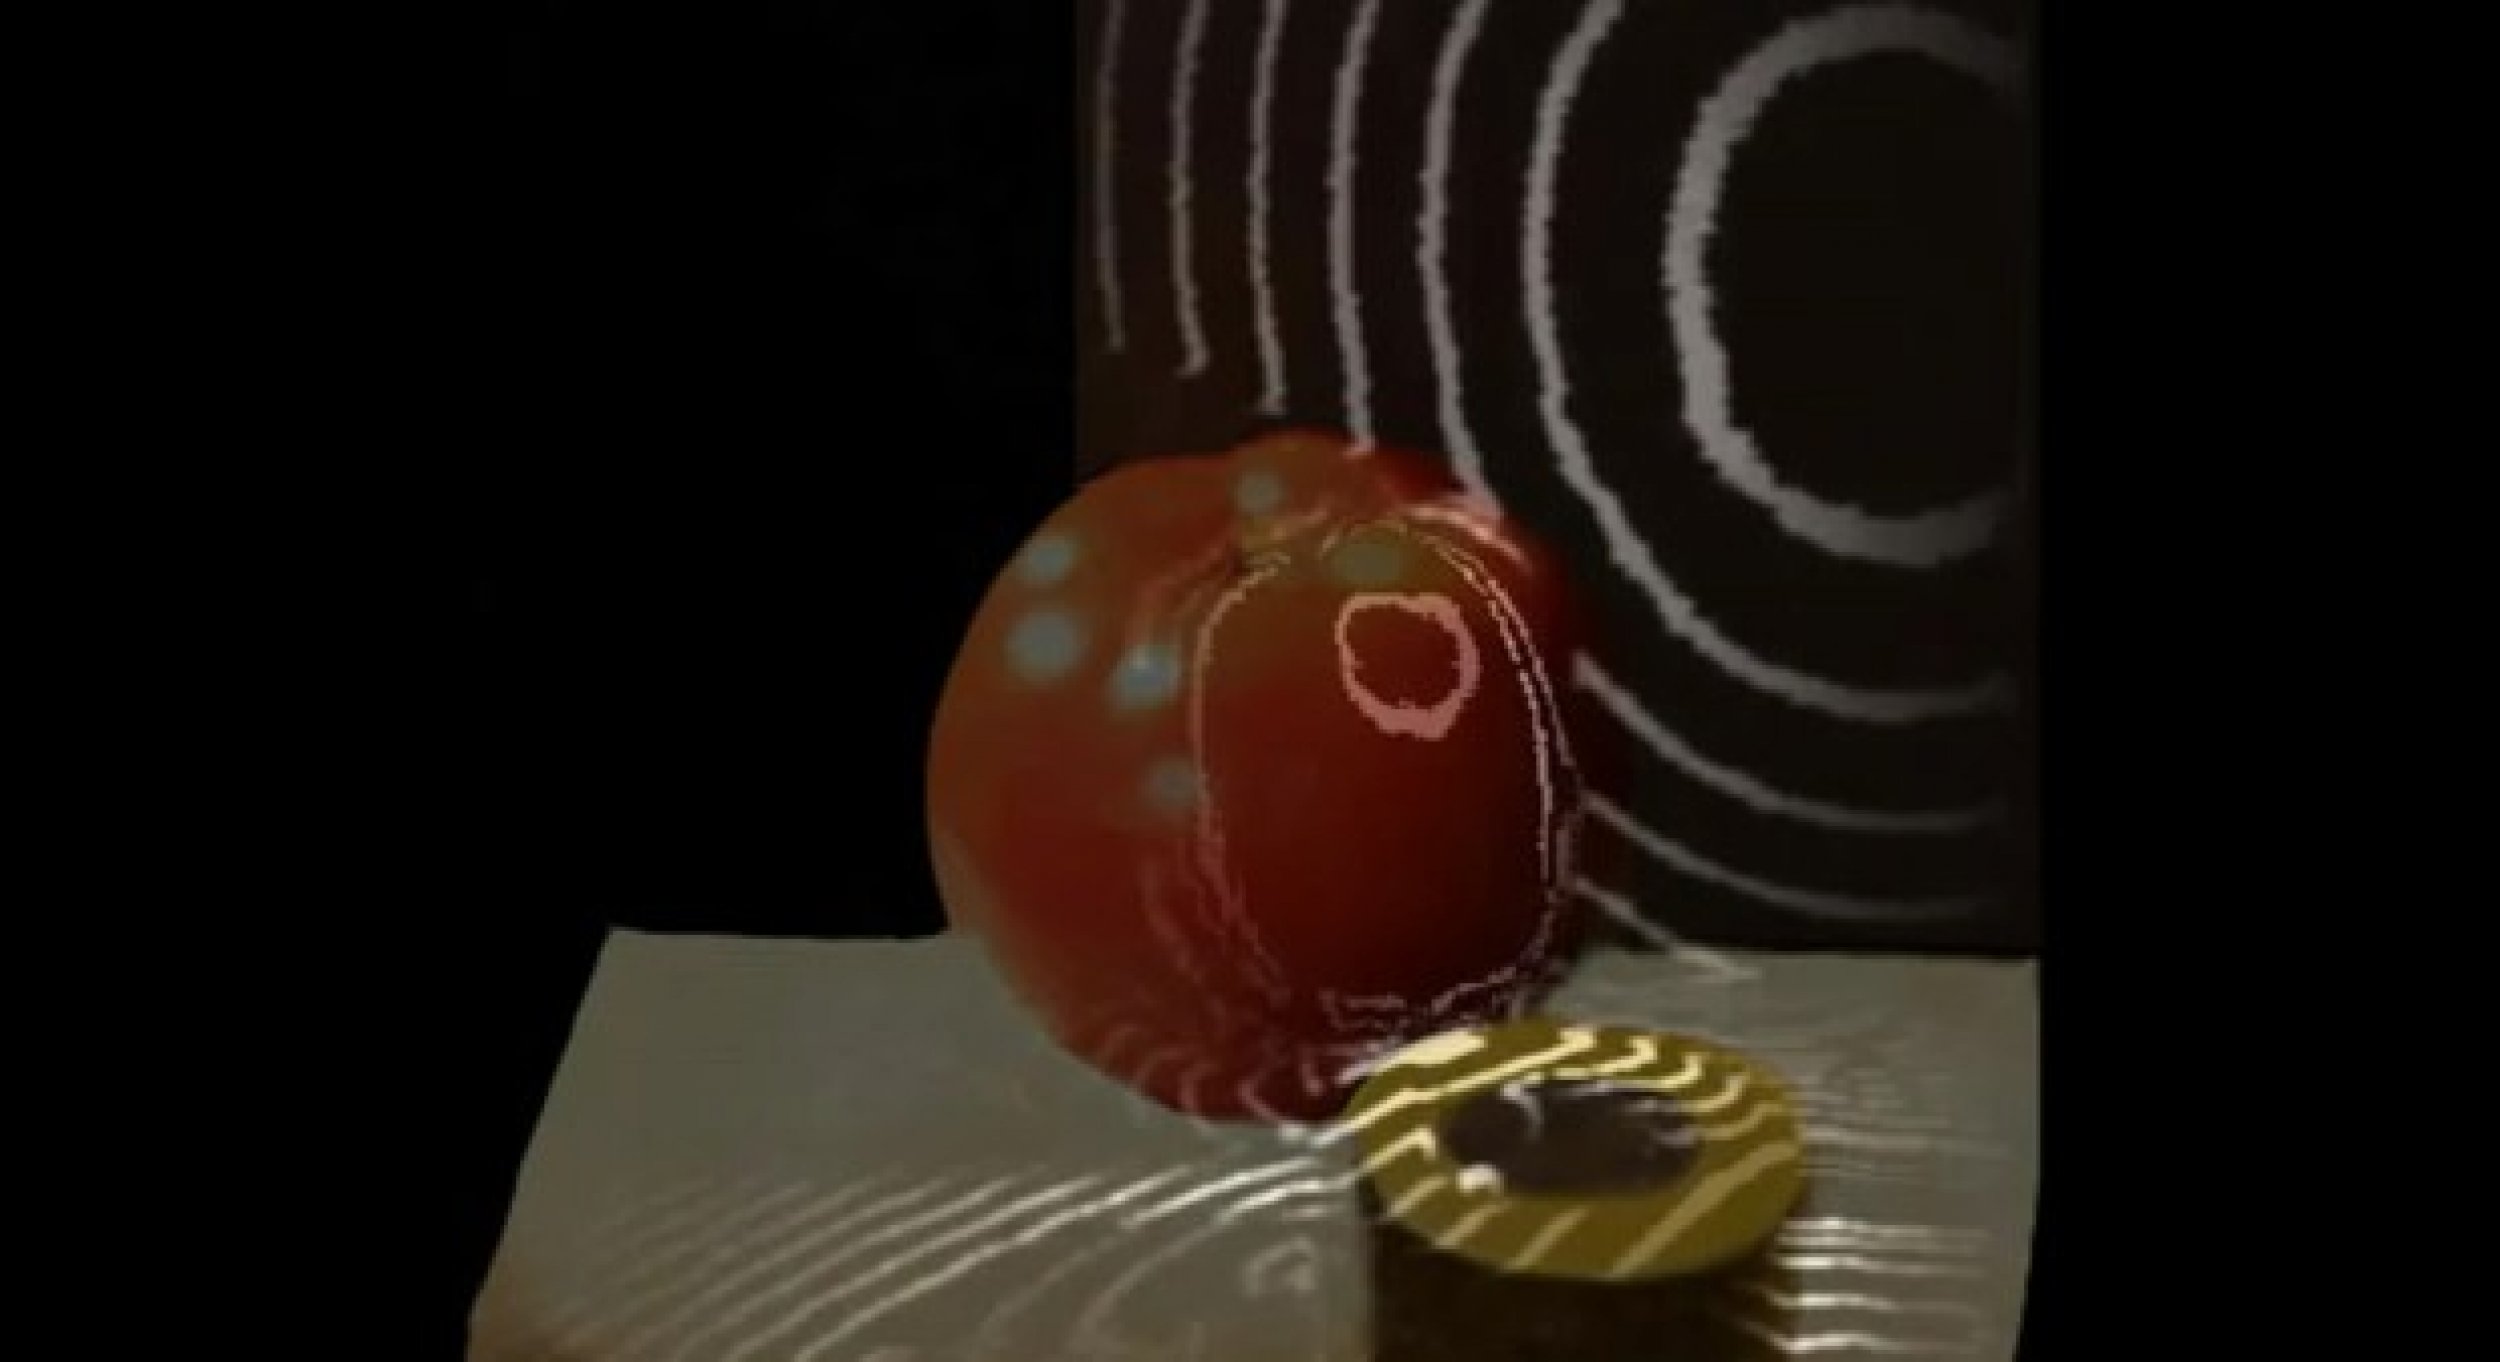 A Trillion FPS Camera visualizes light movement as it pass around objects